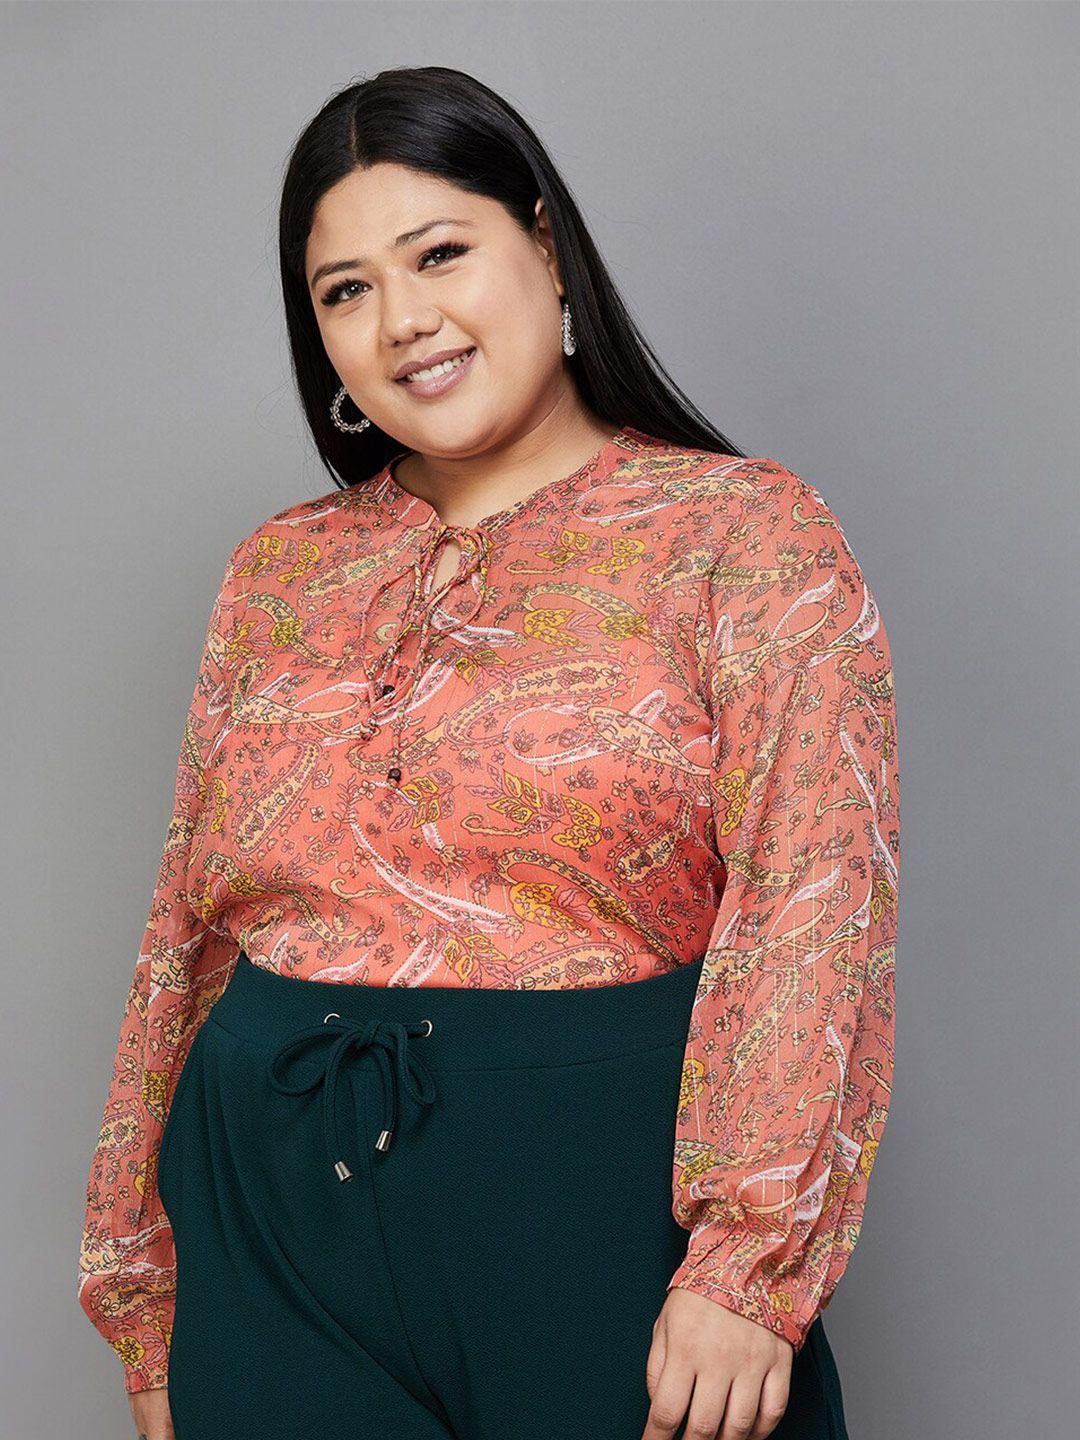 nexus-by-lifestyle-plus-size-floral-printed-tie-up-neck-top